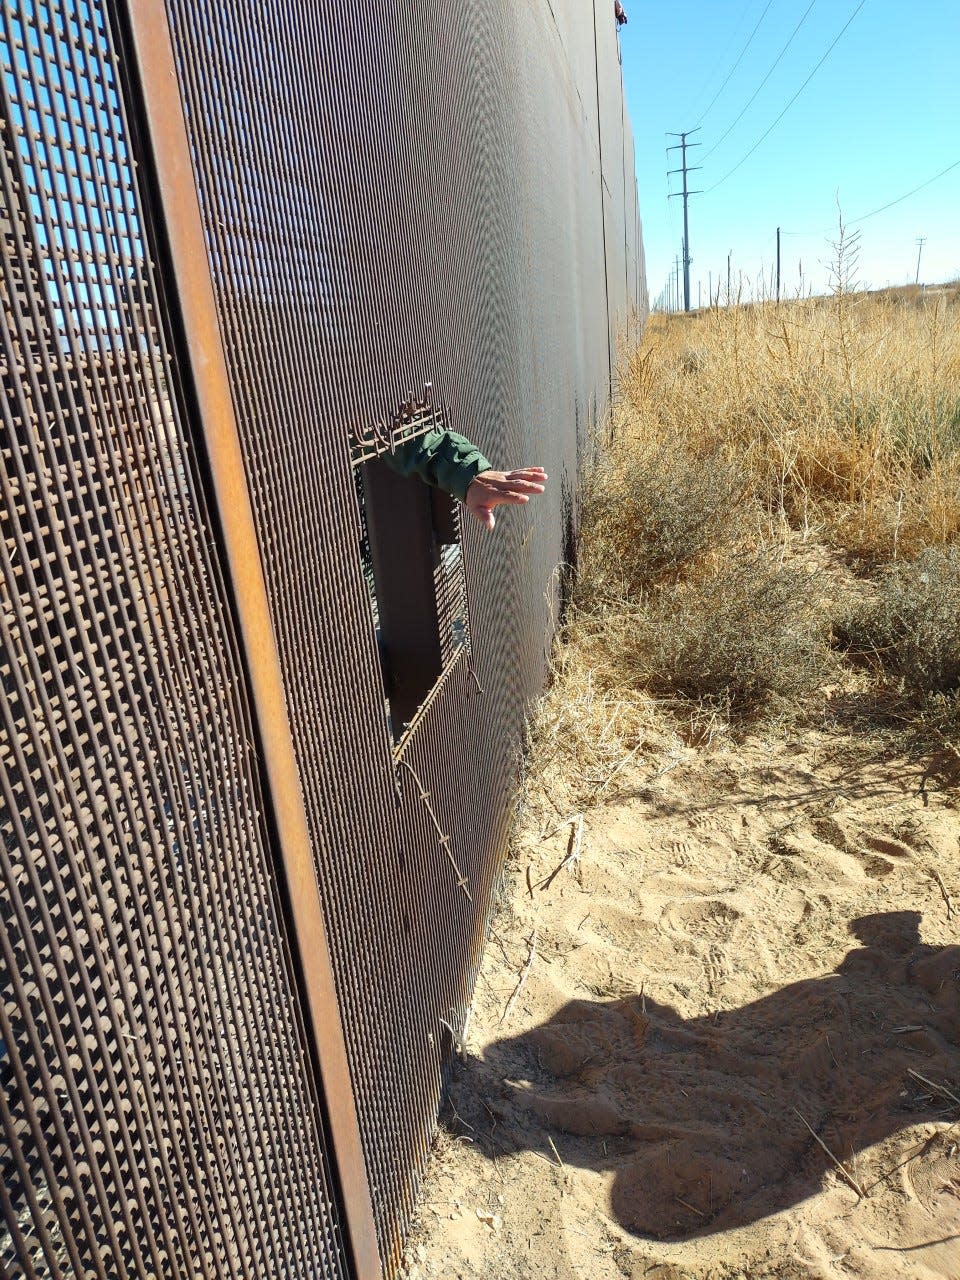 A United States border agent reaches a hand through a hole cut in the border wall separating the United States and Mexico on Dec. 29, 2021. The hole was likely cut to allow migrants to illegally enter the U.S. near Sunland Park, New Mexico, the agent said.